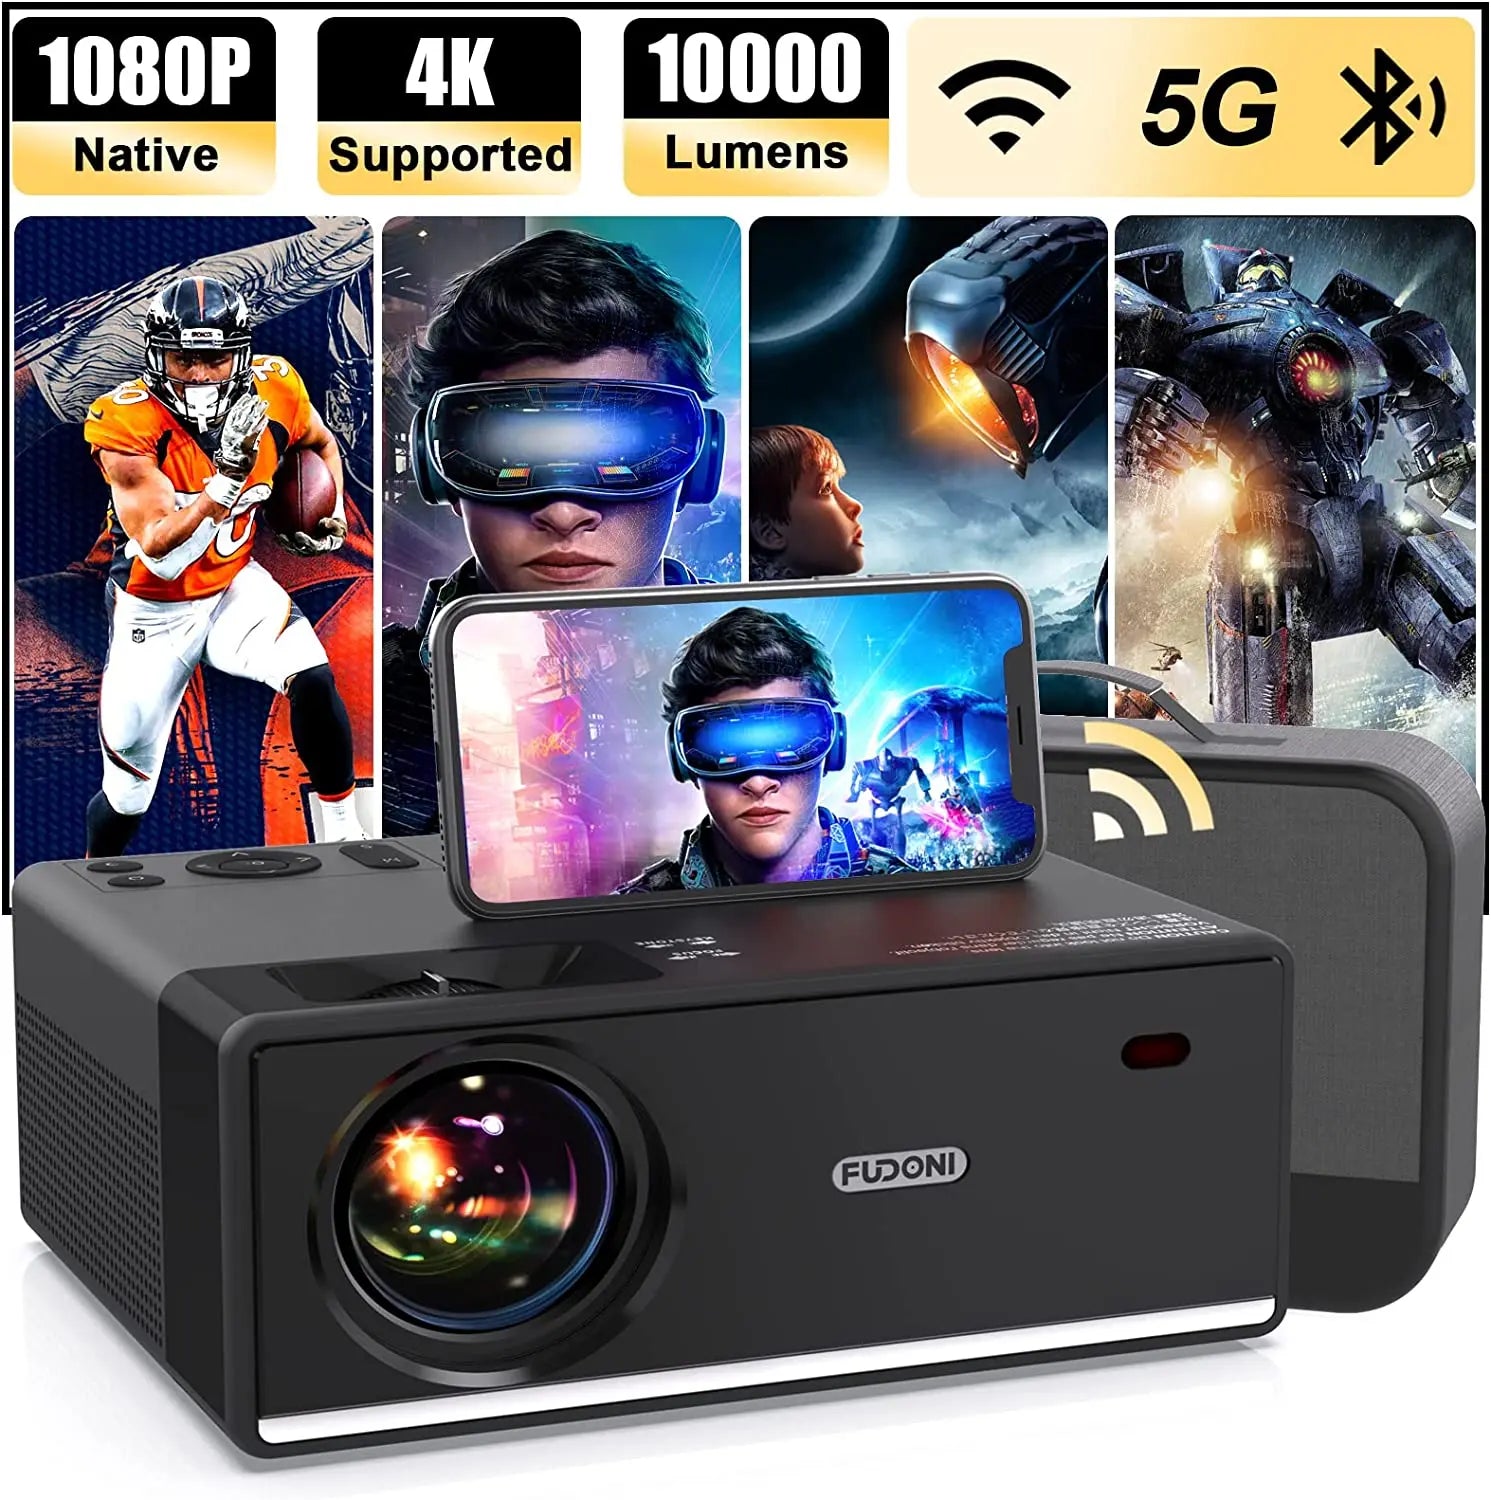 New Year Sale - Projector with WiFi and Bluetooth, Projector 4K Support Native 1080P Projector, 5G WiFi FUDONI Outdoor Projector with 400 ANSI Max 300" Display, Movie Projector Compatible w/iOS/Android/Win/PS5, Black FUDONI